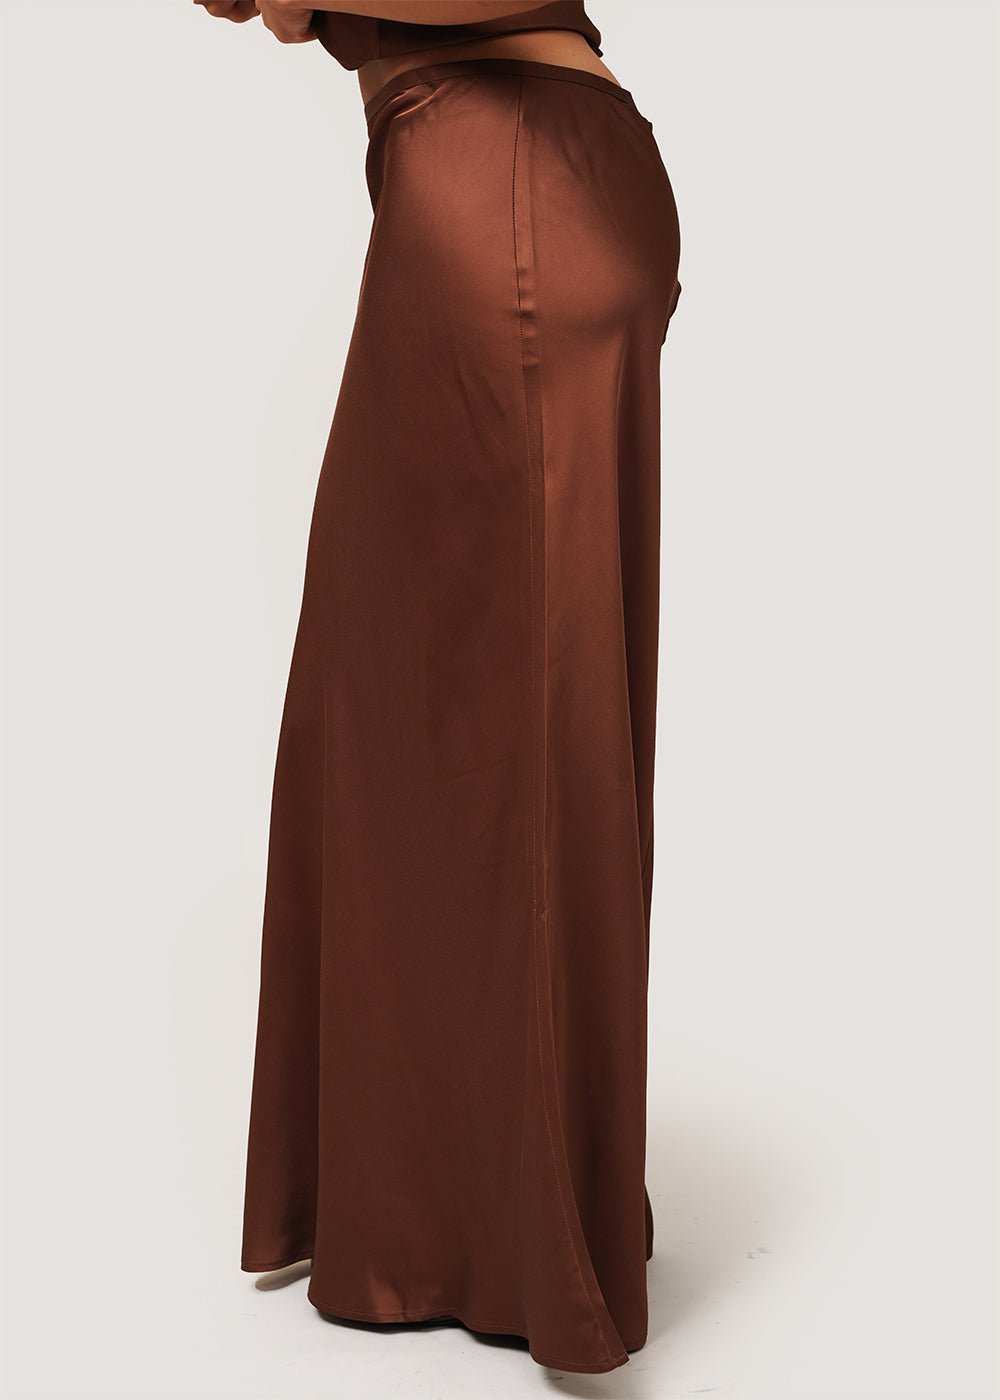 Baserange Dark Brown Dydine Fitted Skirt - New Classics Studios Sustainable Ethical Fashion Canada